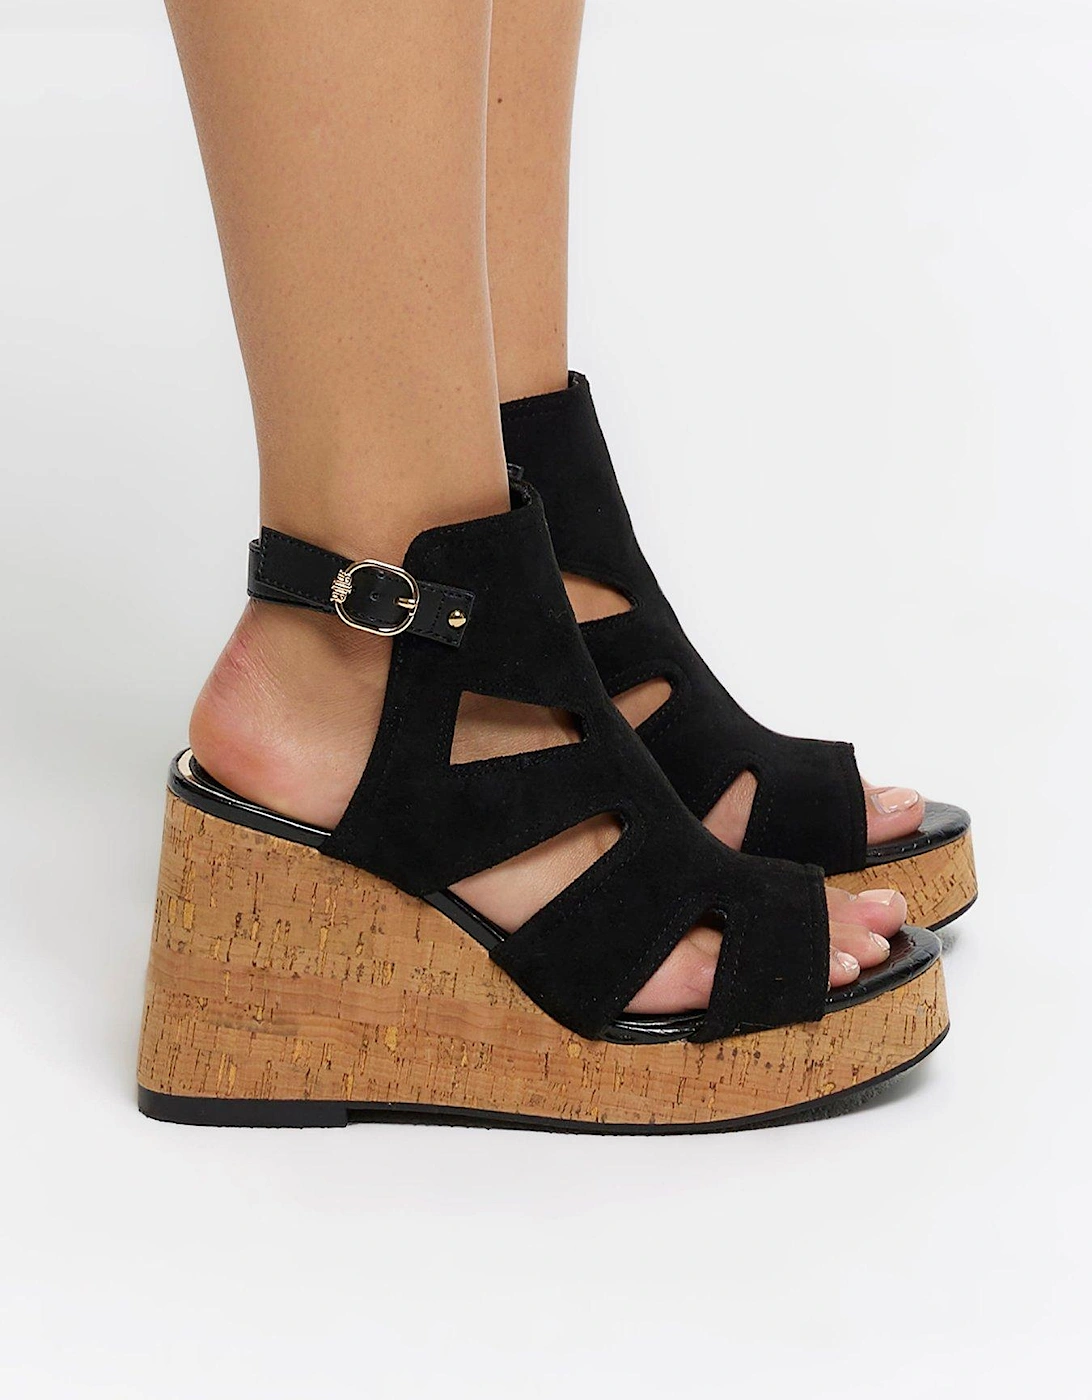 Cut Out Wedge Sandals - Black